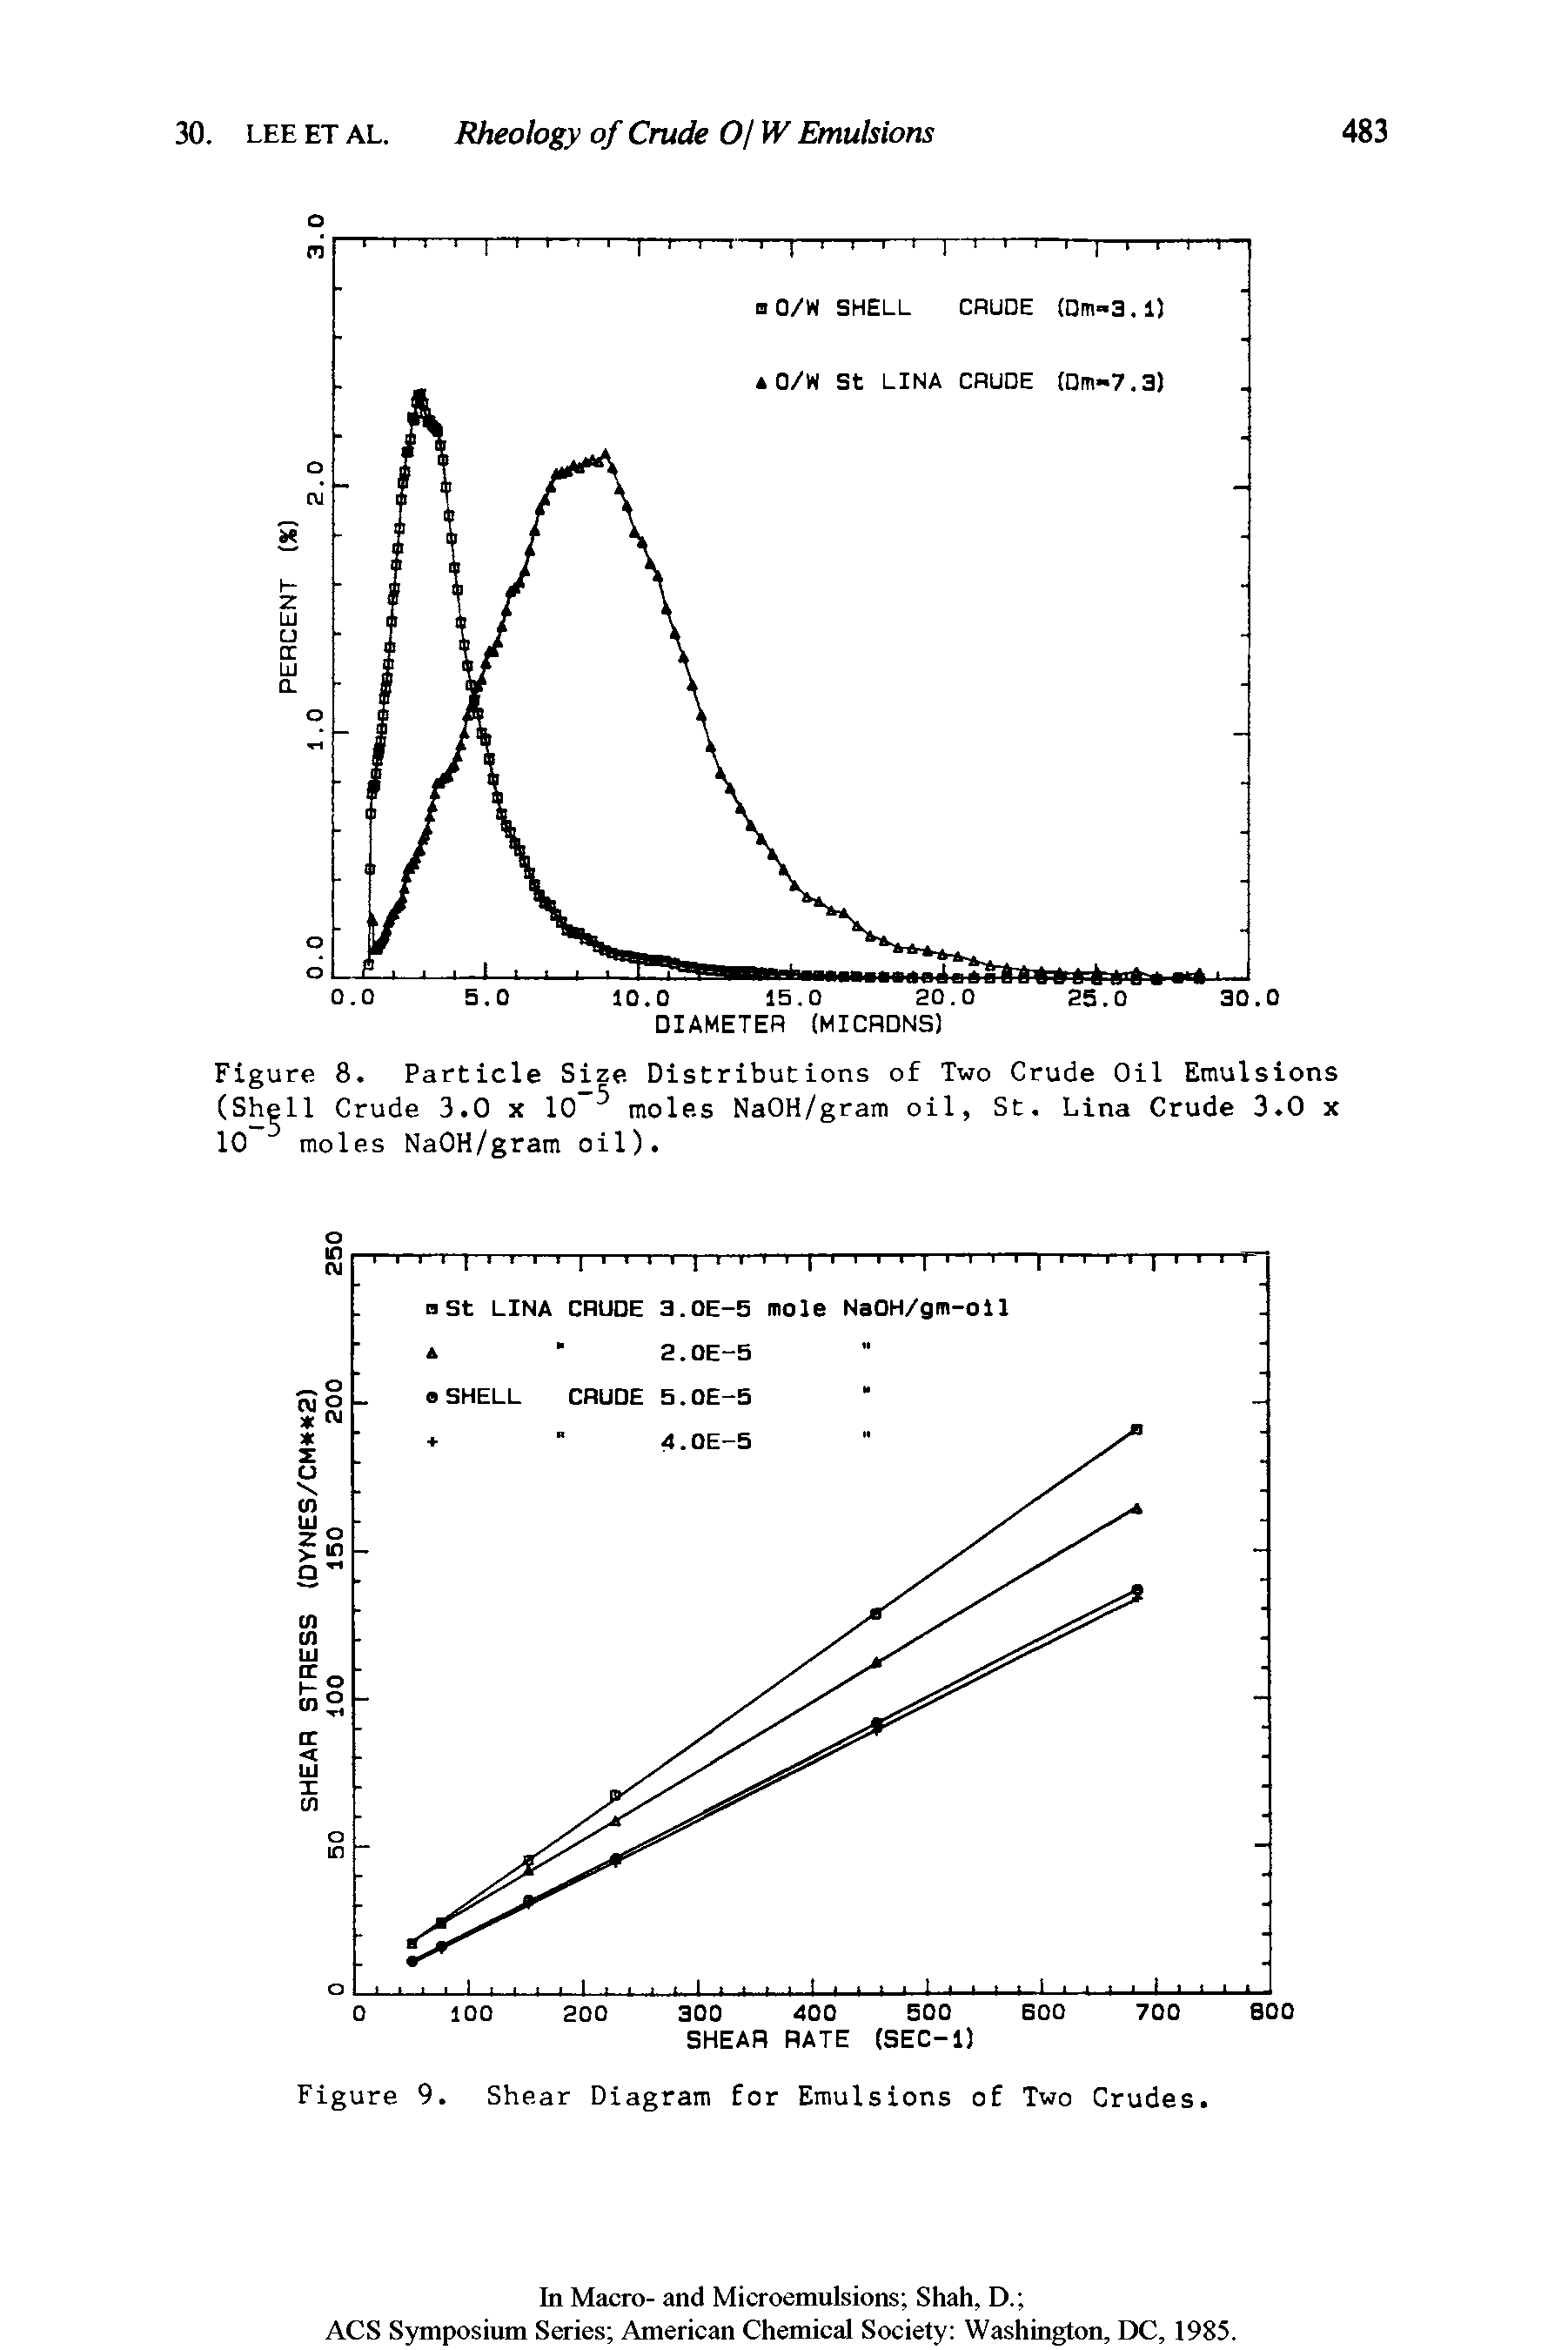 Figure 8. Particle Size Distributions of Two Crude Oil Emulsions (Shell Crude 3.0 x 10 moles NaOH/gram oil, St. Lina Crude 3.0 x 10 moles NaOH/gram oil).